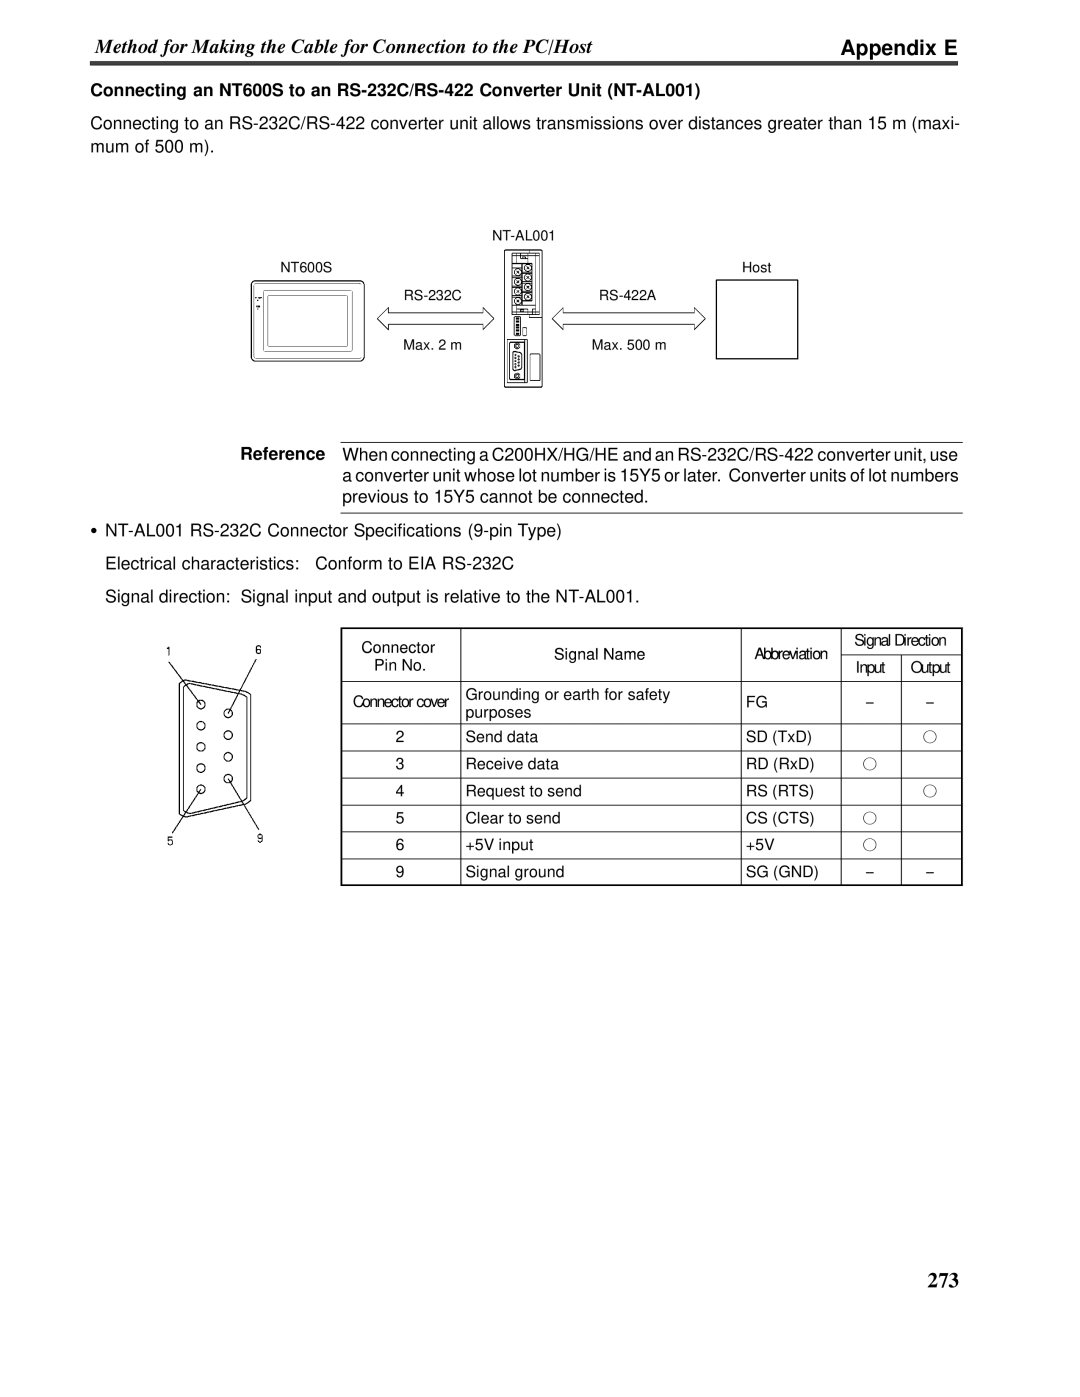 Omron V022-E3-1 operation manual Appendix E, previous to 15Y5 cannot be connected 